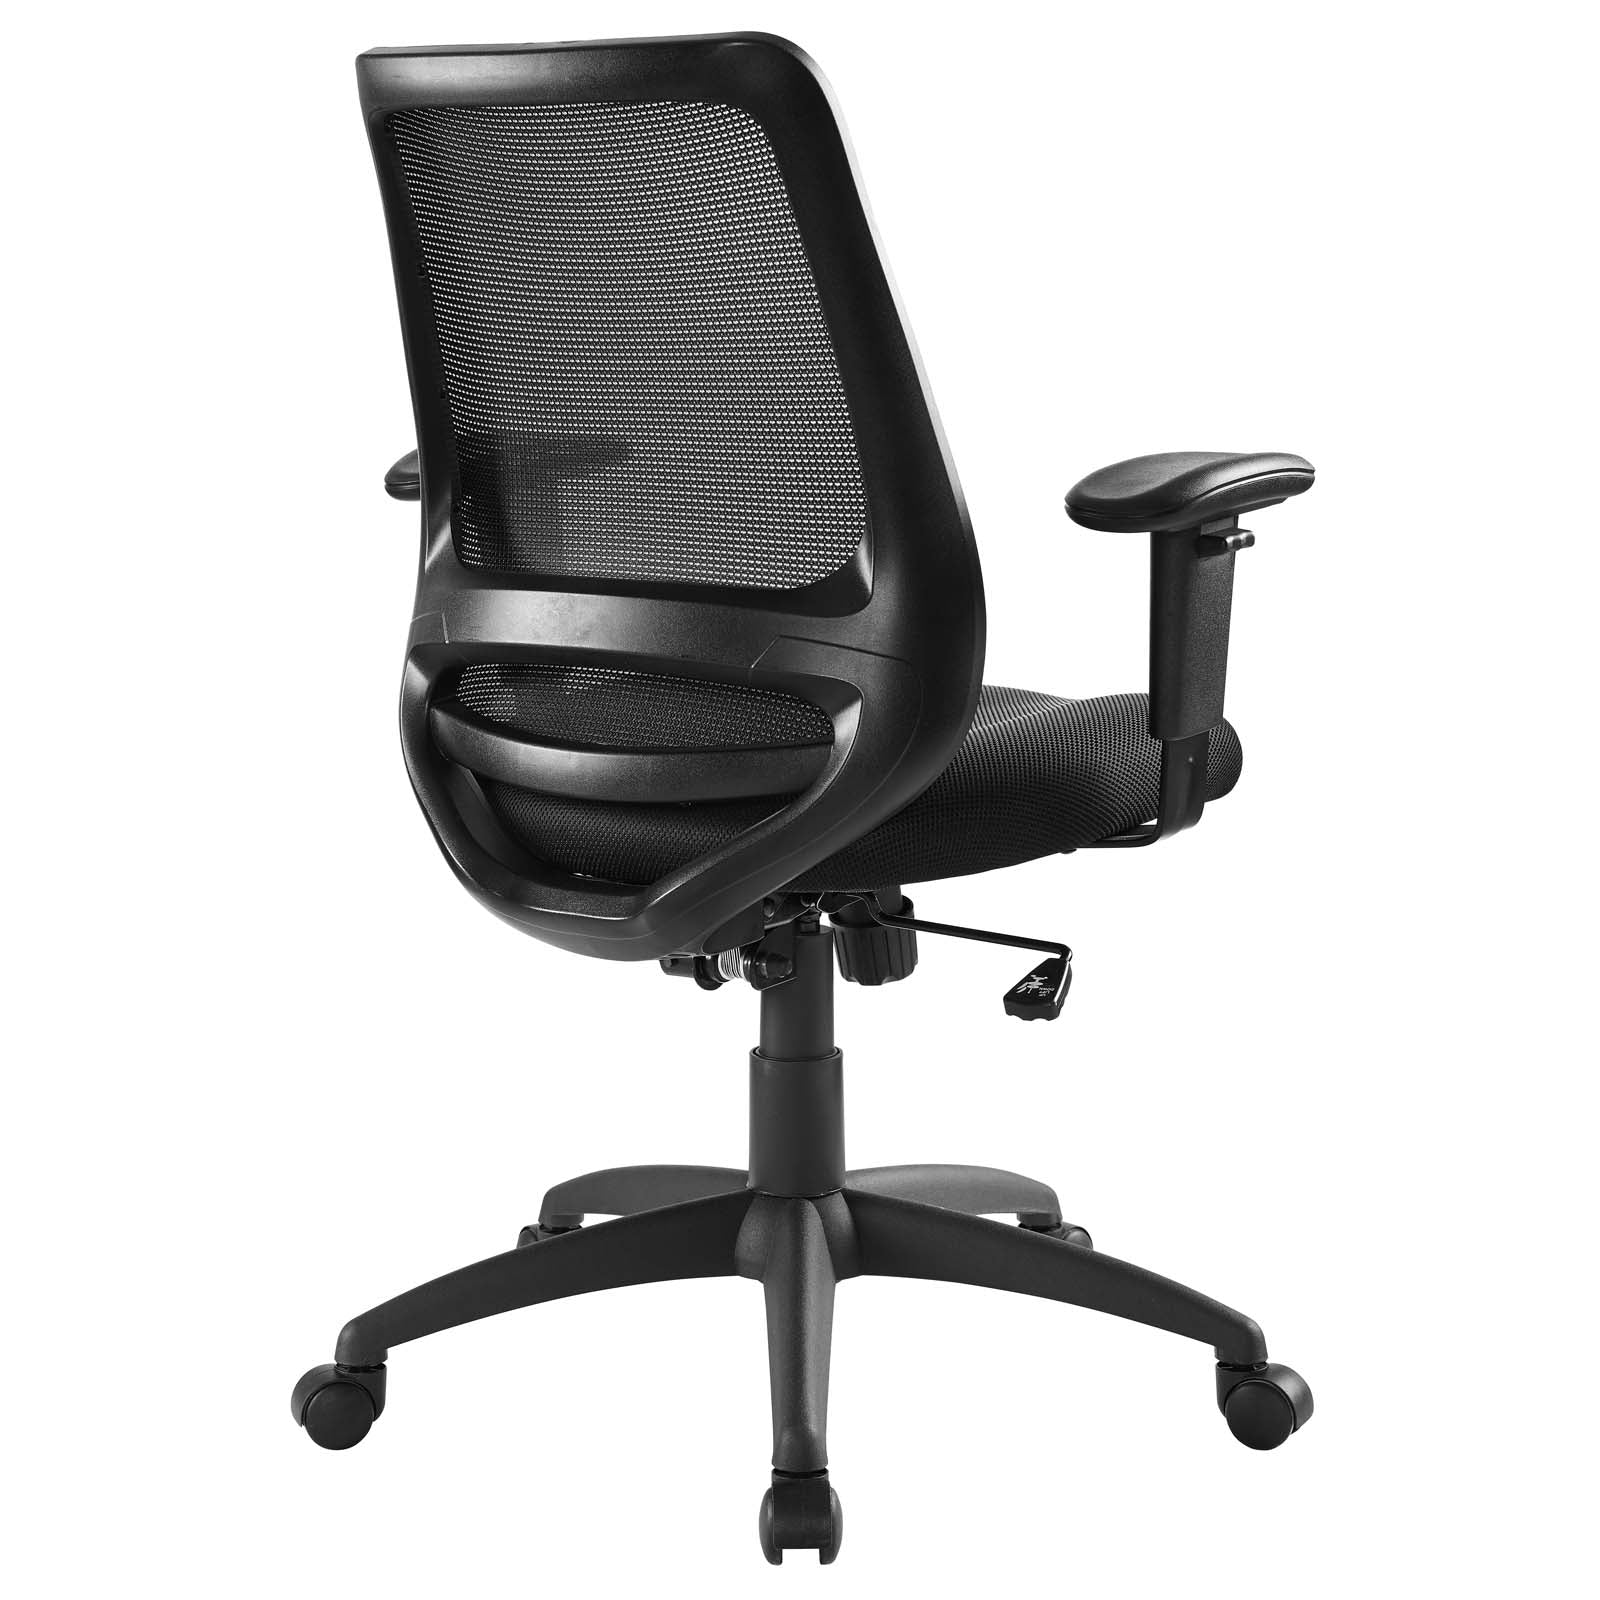 Forge Mesh Office Chair For Extra Comfort | BUILDMyplace 